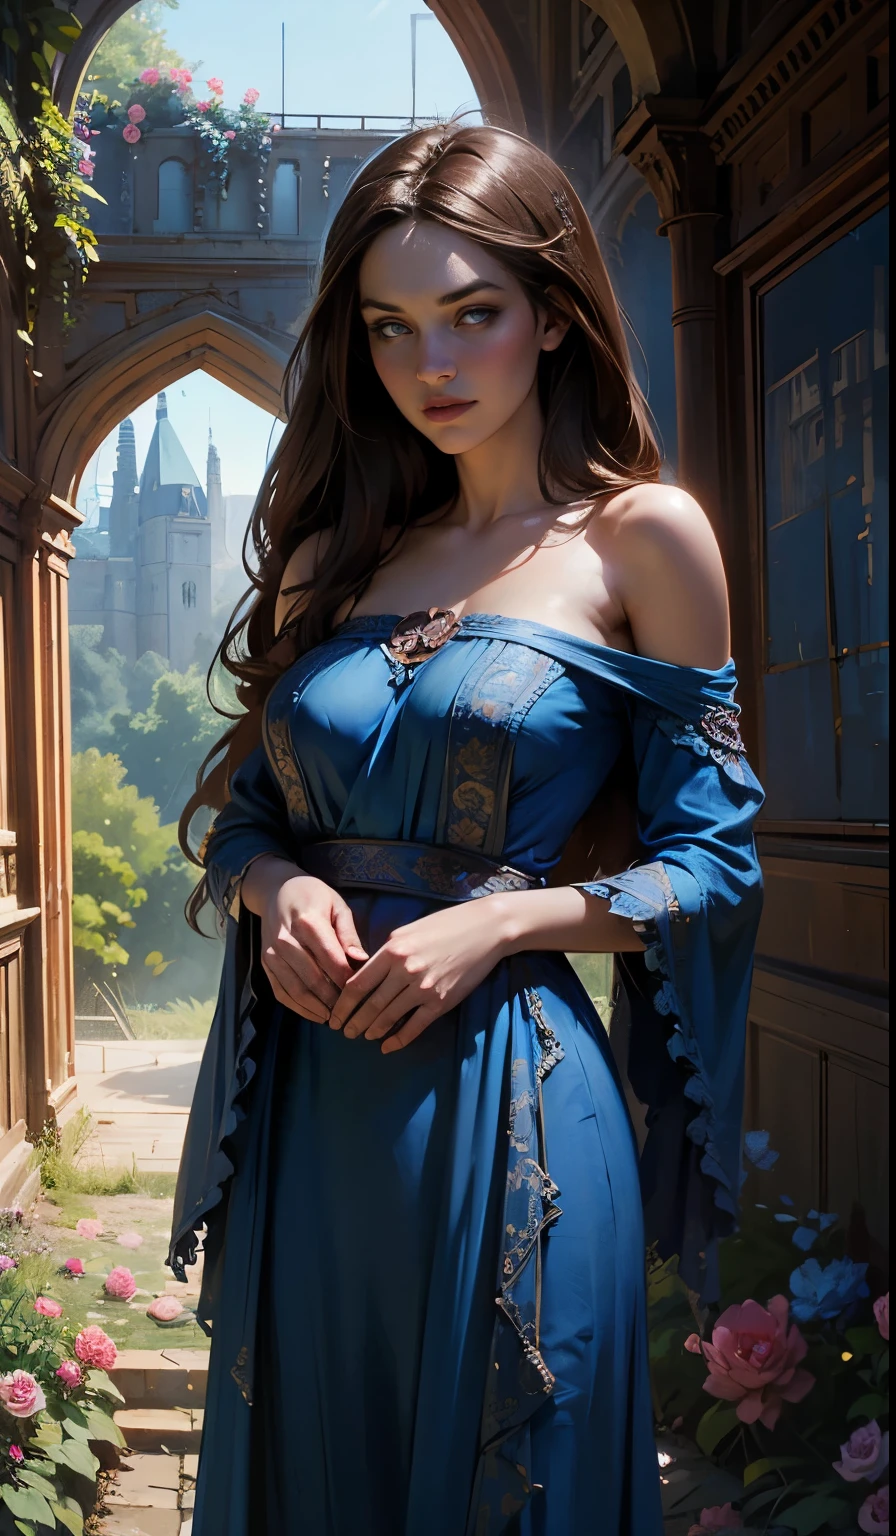 NSFW dark fantasy, a girl, charming, with long brown hair, blue eyes, in a blue dress, open shoulders, patterns on fabric, an abandoned dilapidated castle, flowers, peonies.